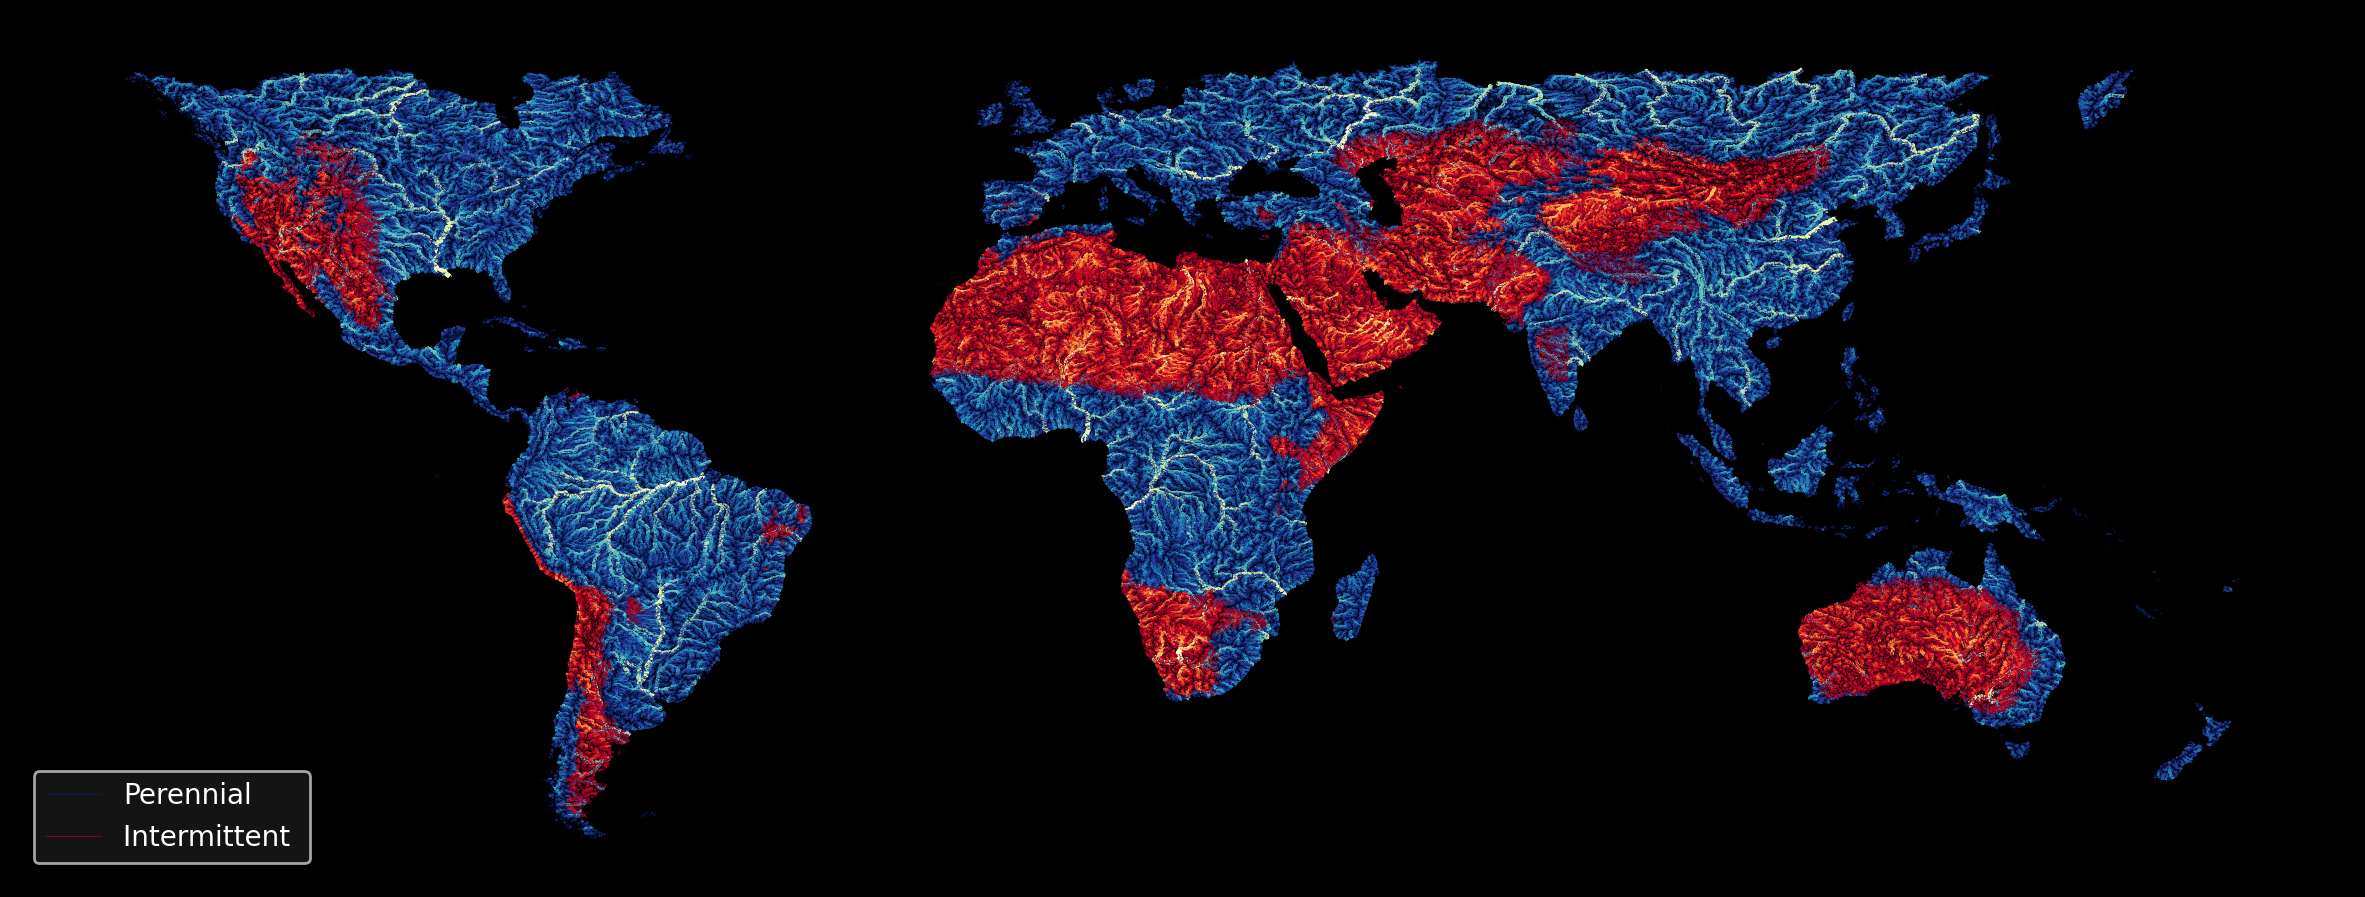 Stream/ Drainage network of the World.